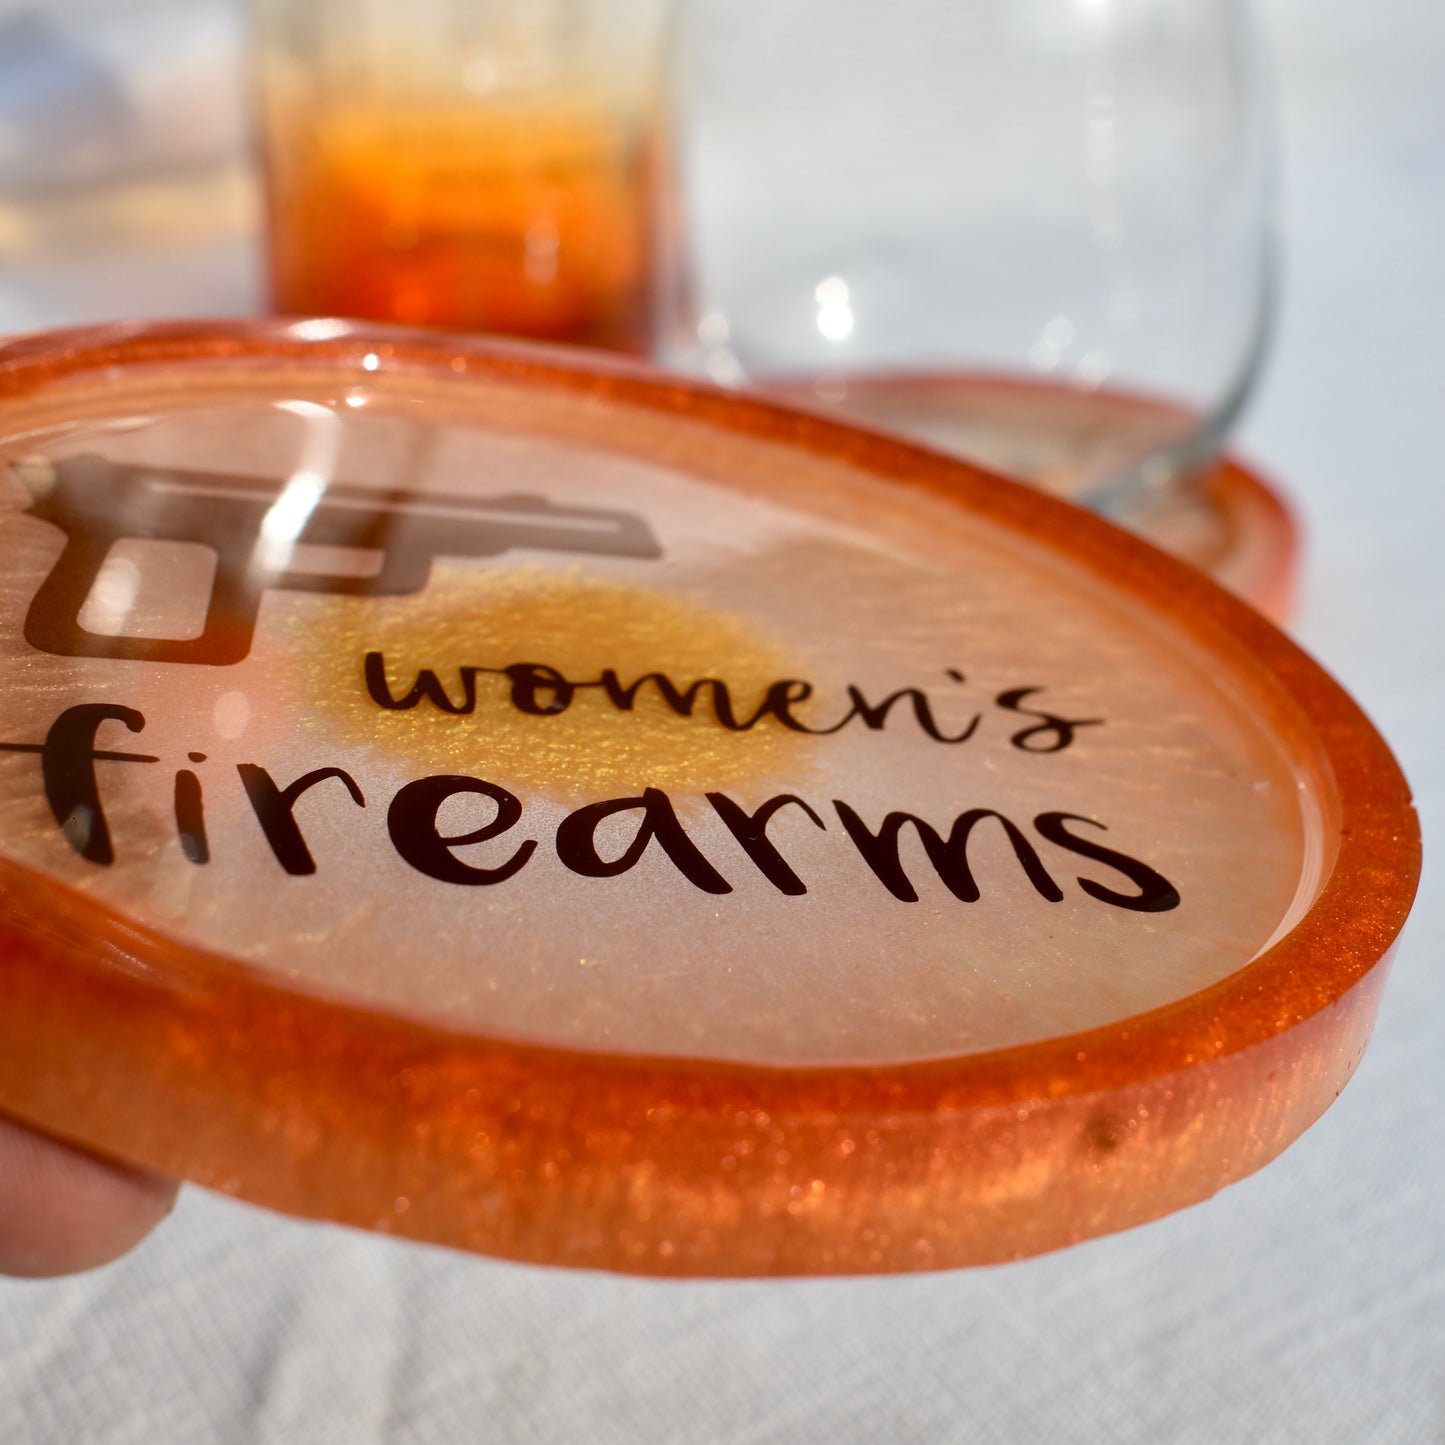 Women's Firearms Coasters • 2A Coaster Set for Her